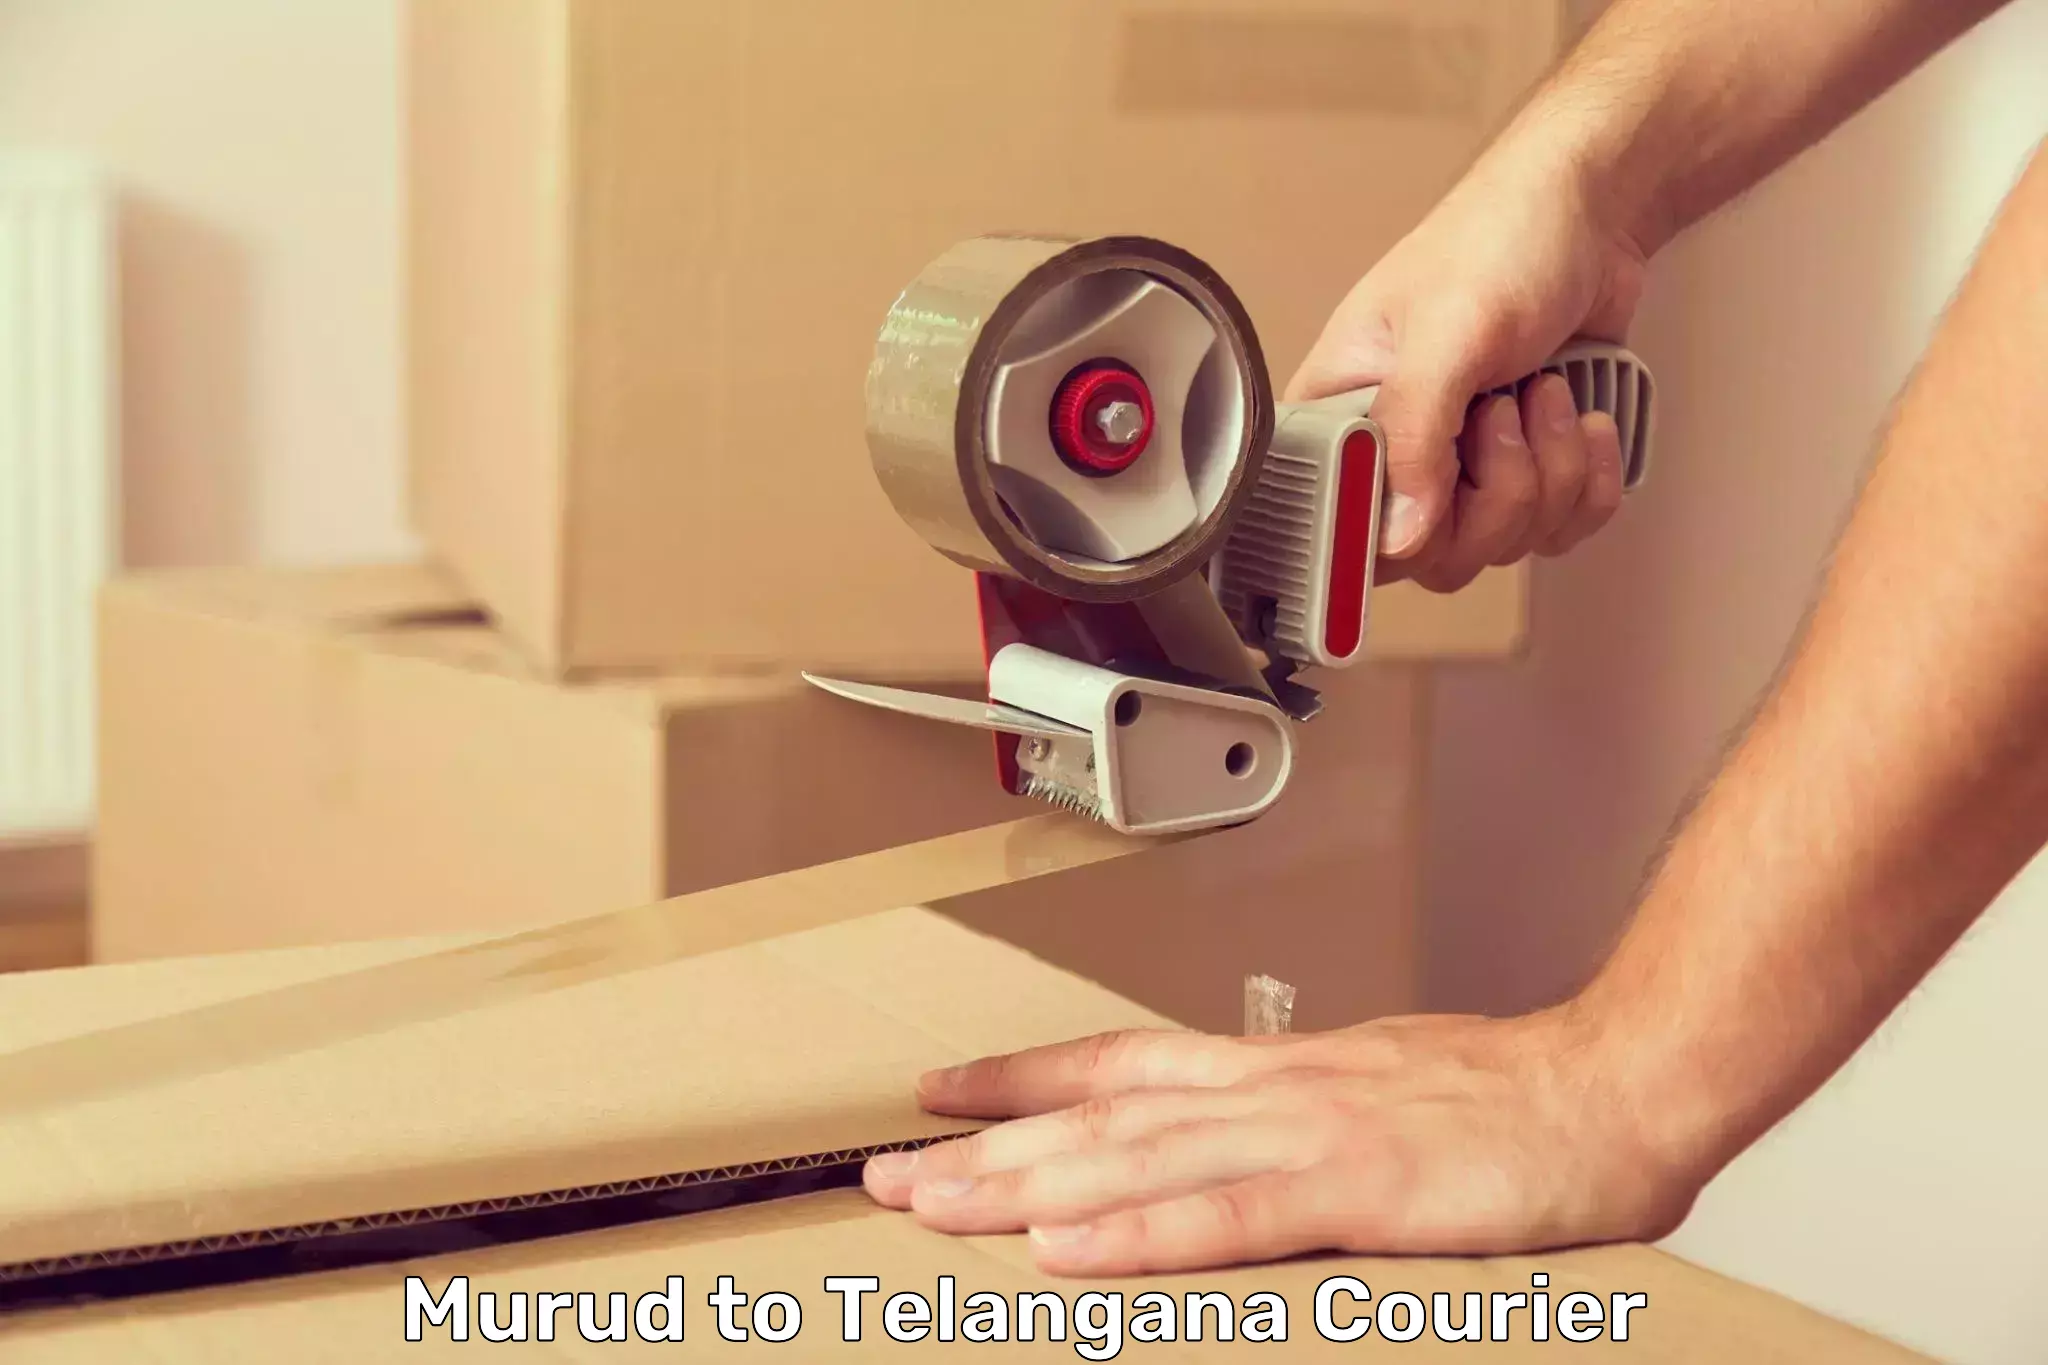 Customer-oriented courier services Murud to Warangal